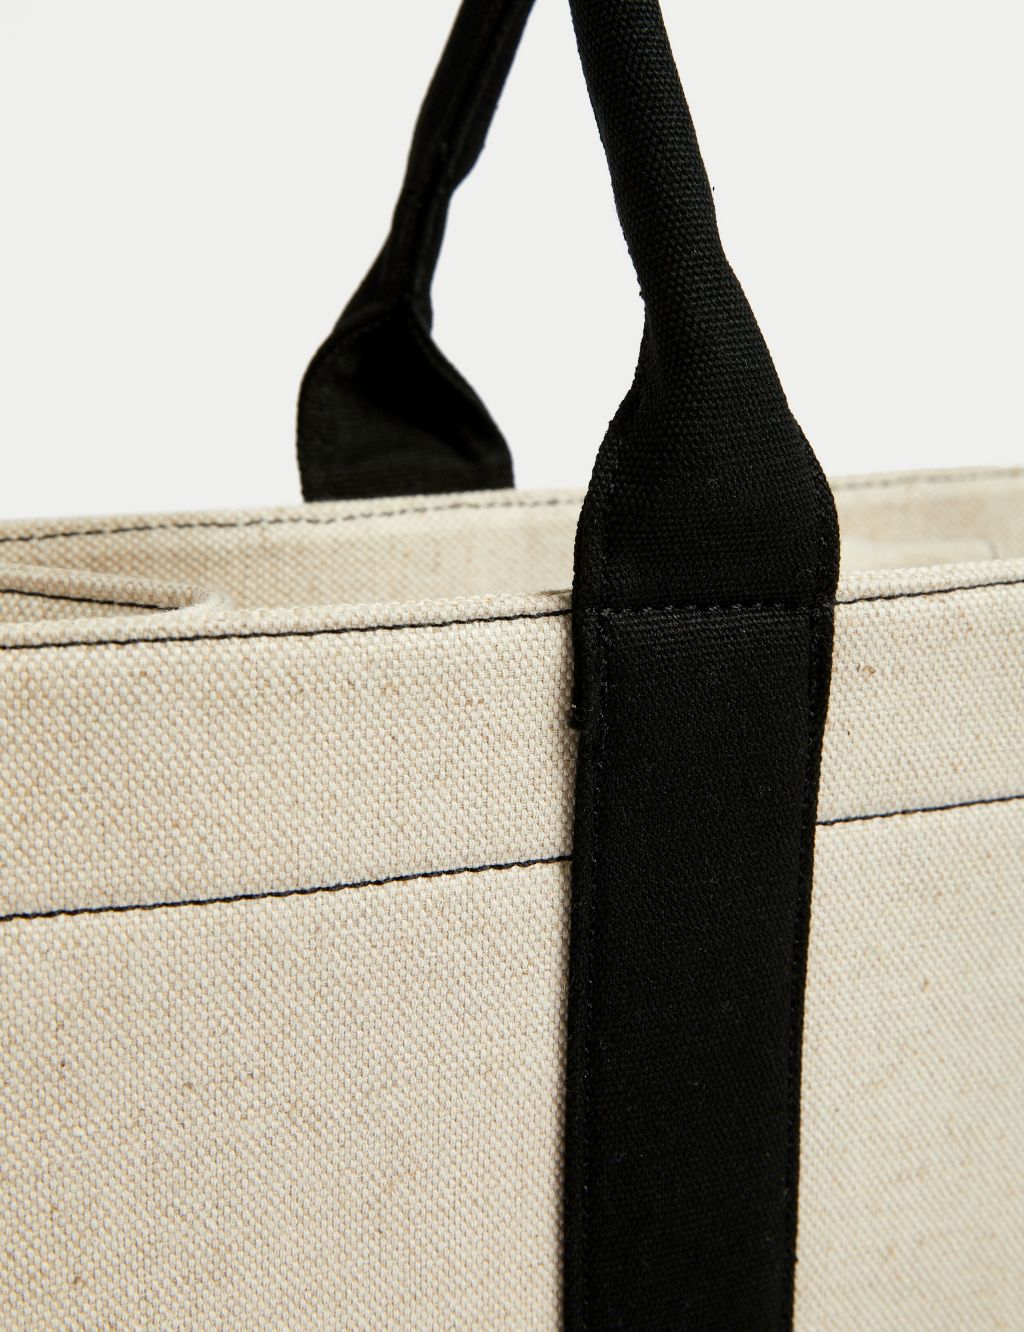 Canvas Structured Tote Bag image 2